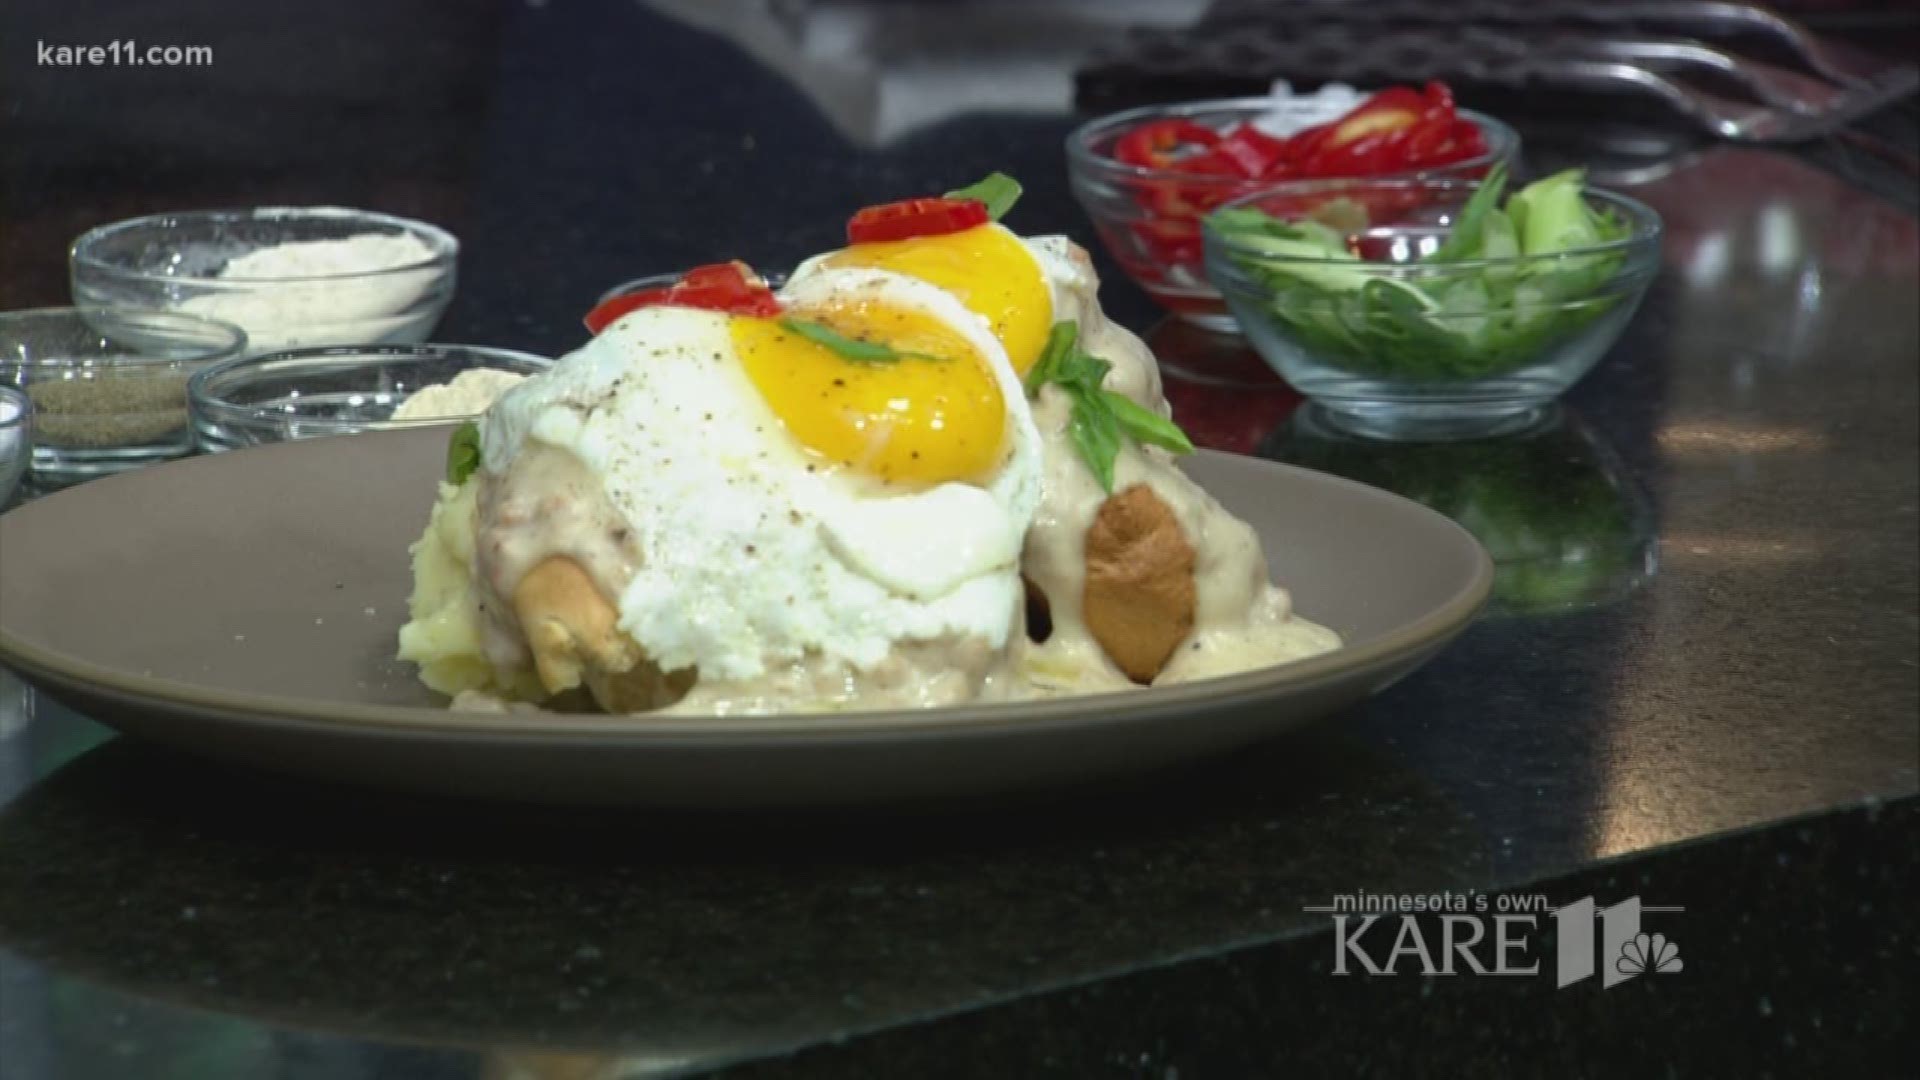 On his latest visit to KARE 11, Chef Angel Luna offered up tips on how to make 6Smith's popular Biscuits & Gravy, made with house-made pork sausage and just a subtle bit of kick. http://kare11.tv/2hSE9xC